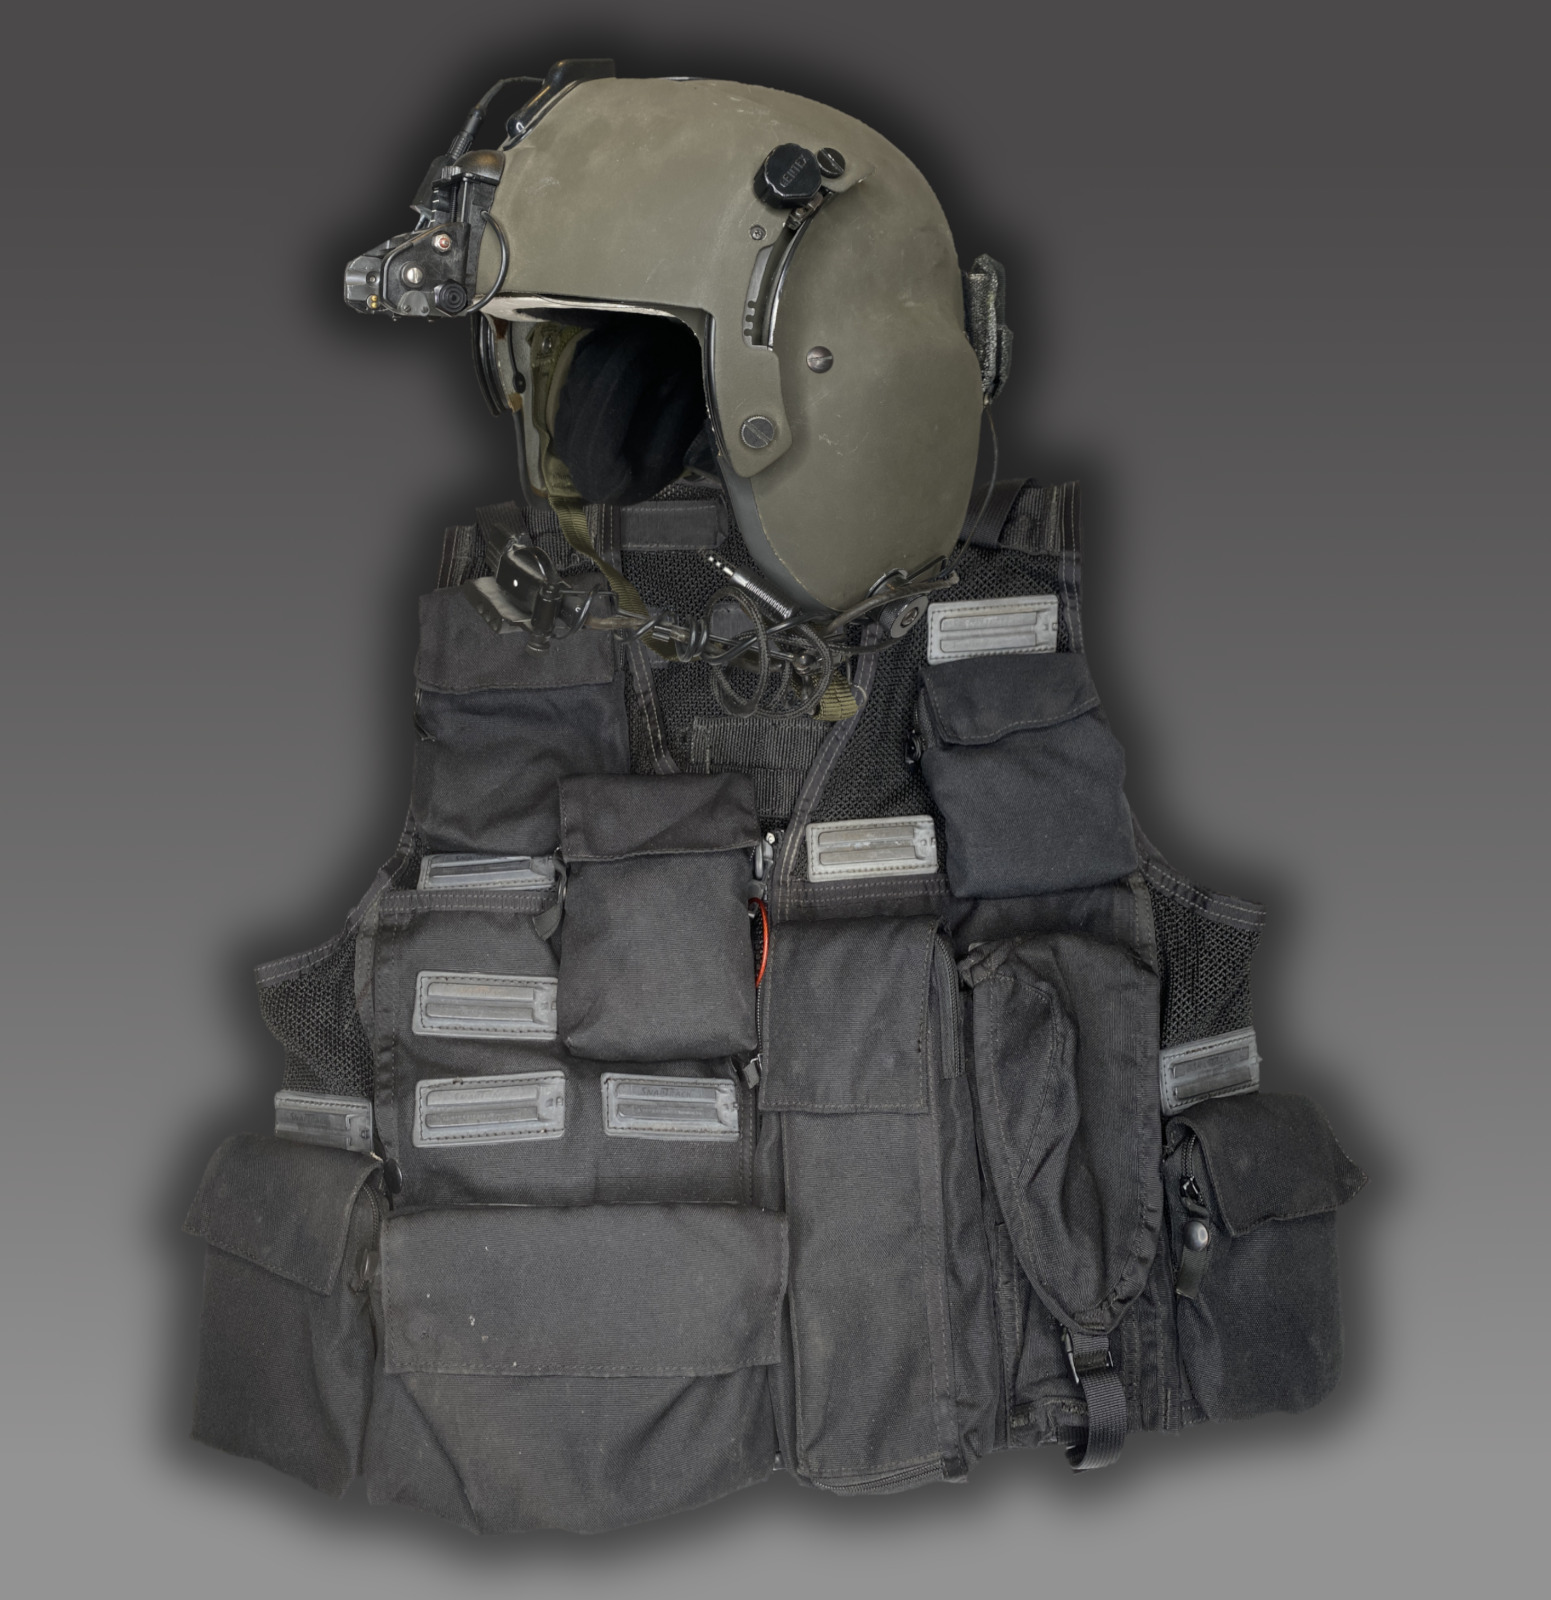 Id\'d USAF 76th HS Huey Pilot Grouping HGU-56 Helicopter Helmet Air Survival Vest